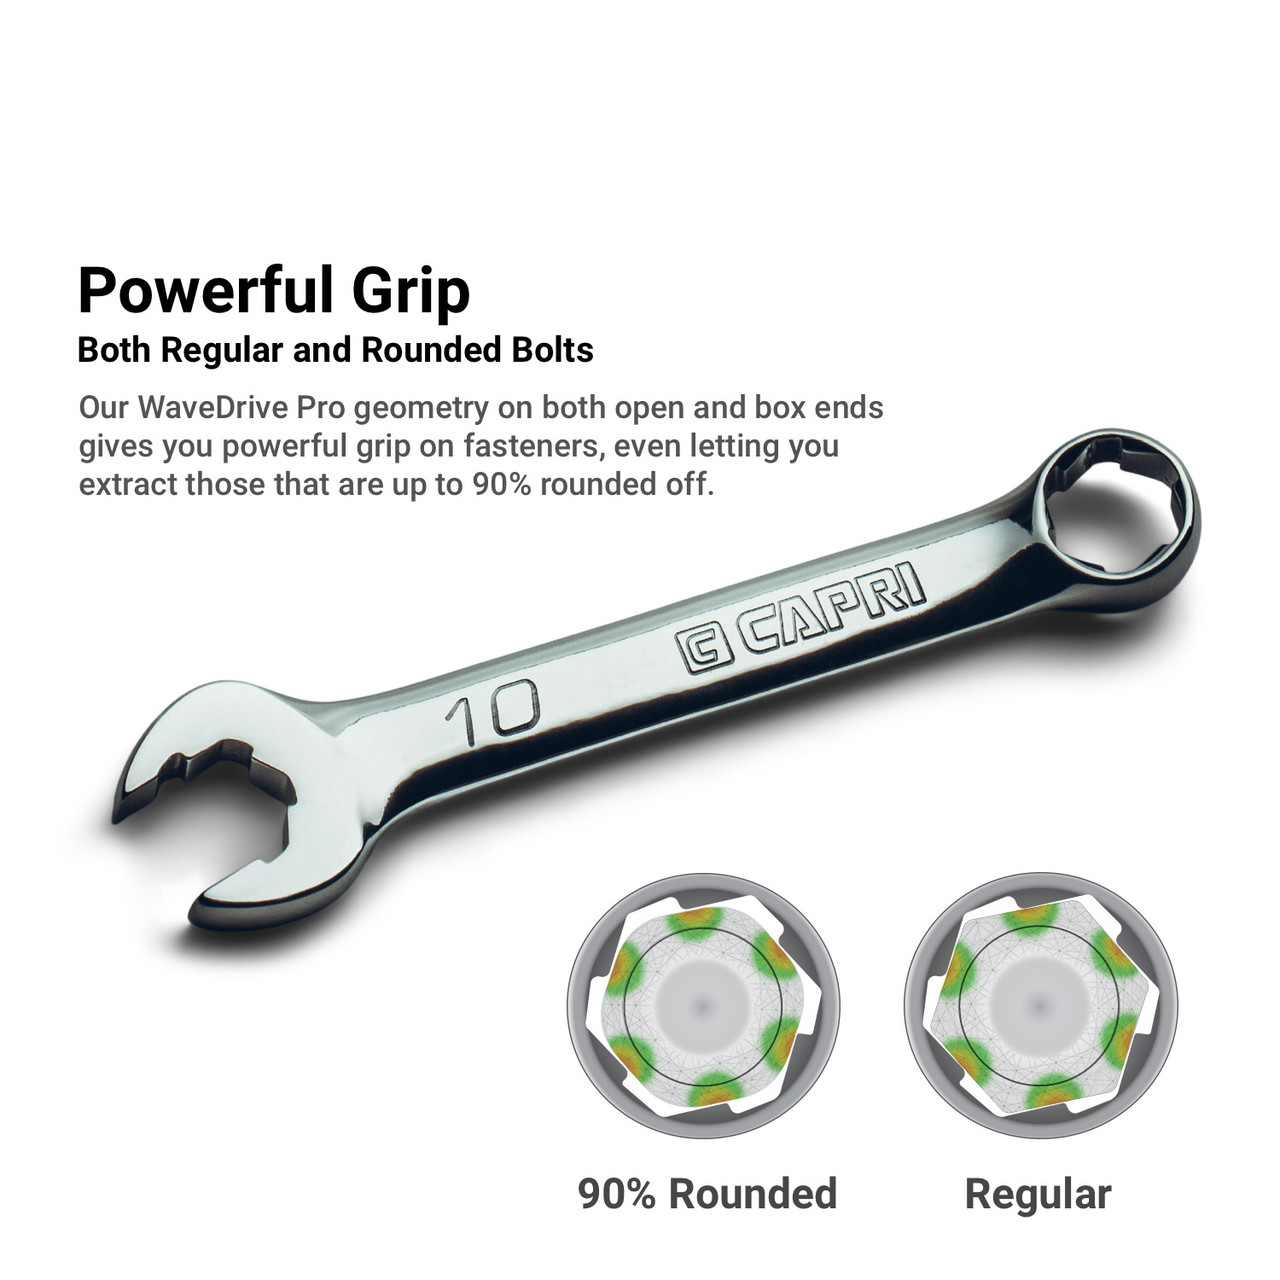 Capri Tools 11/16 in. WaveDrive Pro Stubby Combination Wrench for Regular and Rounded Bolts